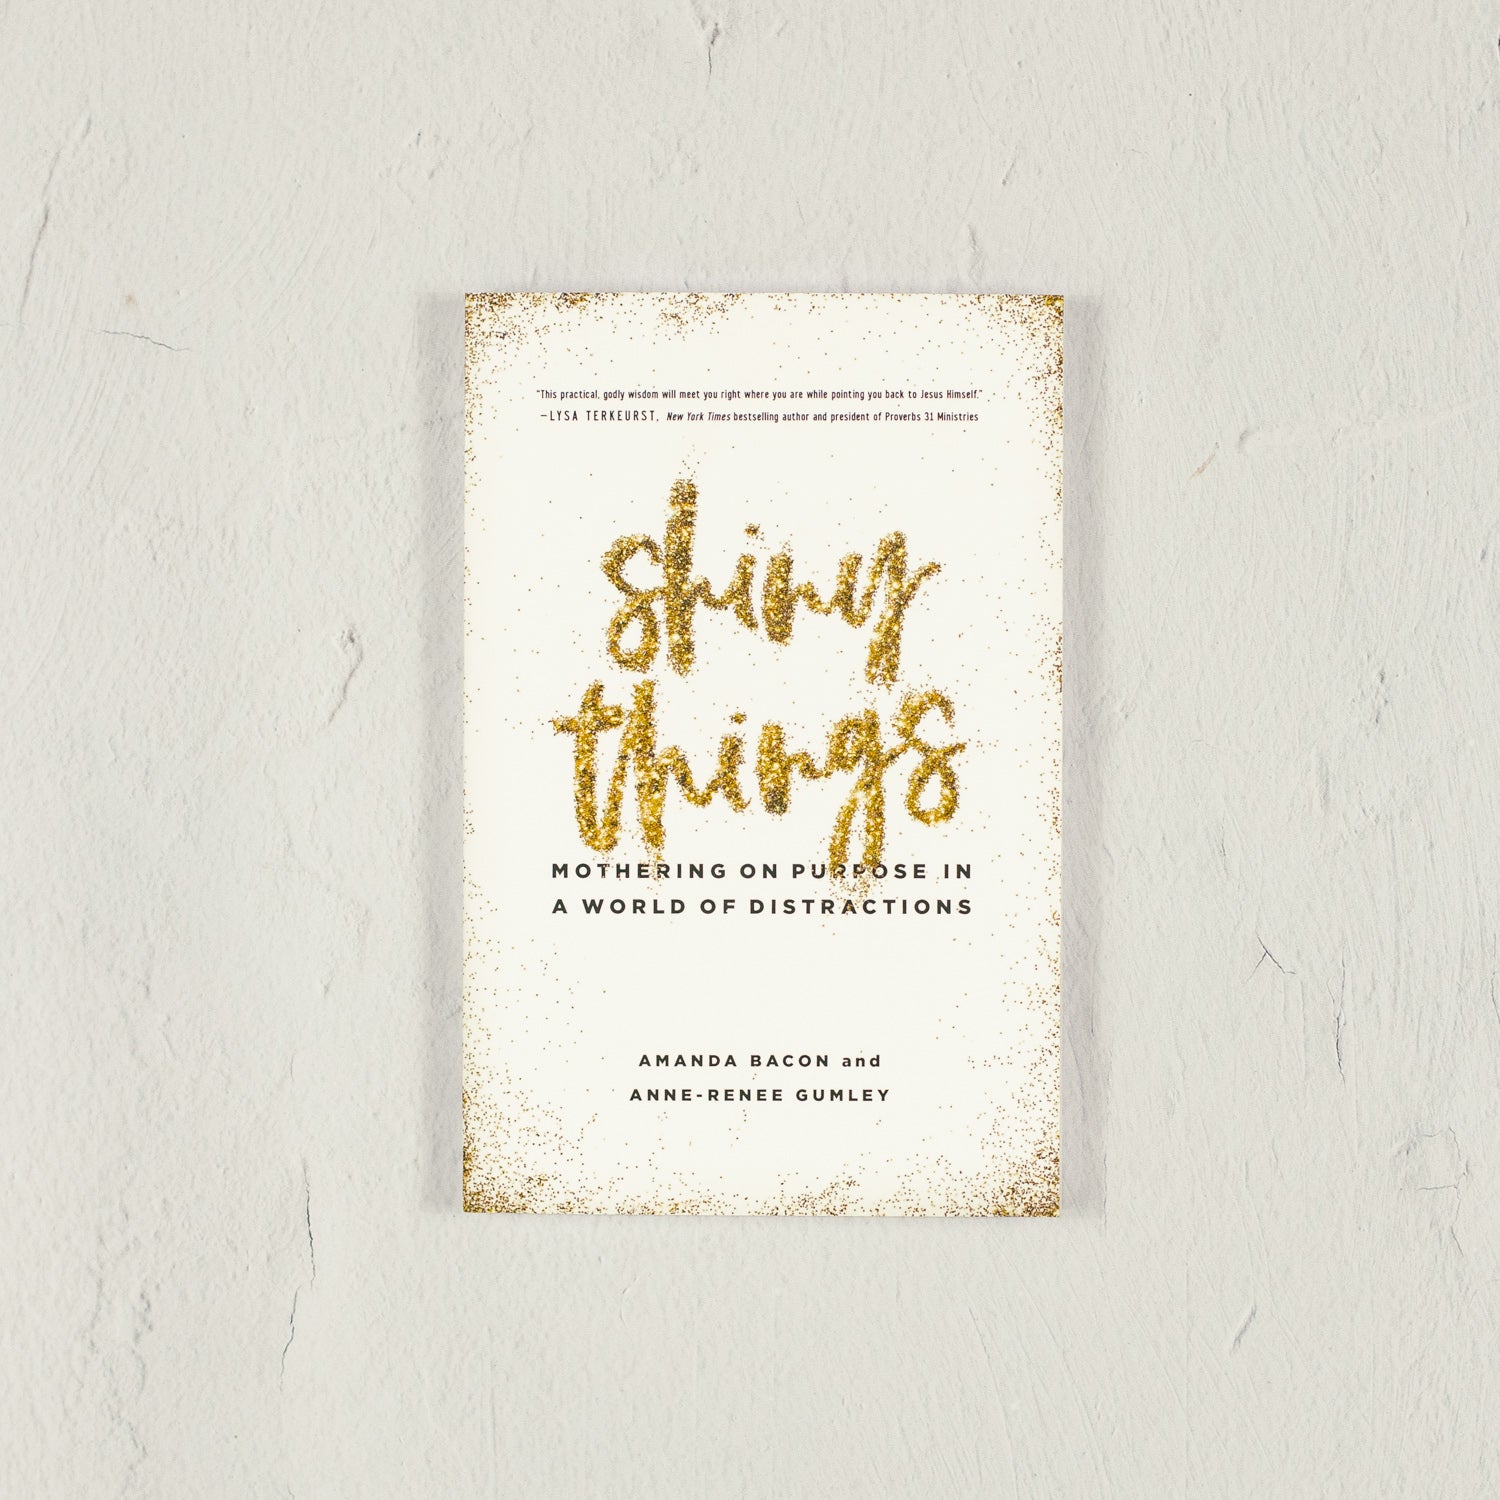 Shiny Things: Mothering on Purpose in a World of Distractions